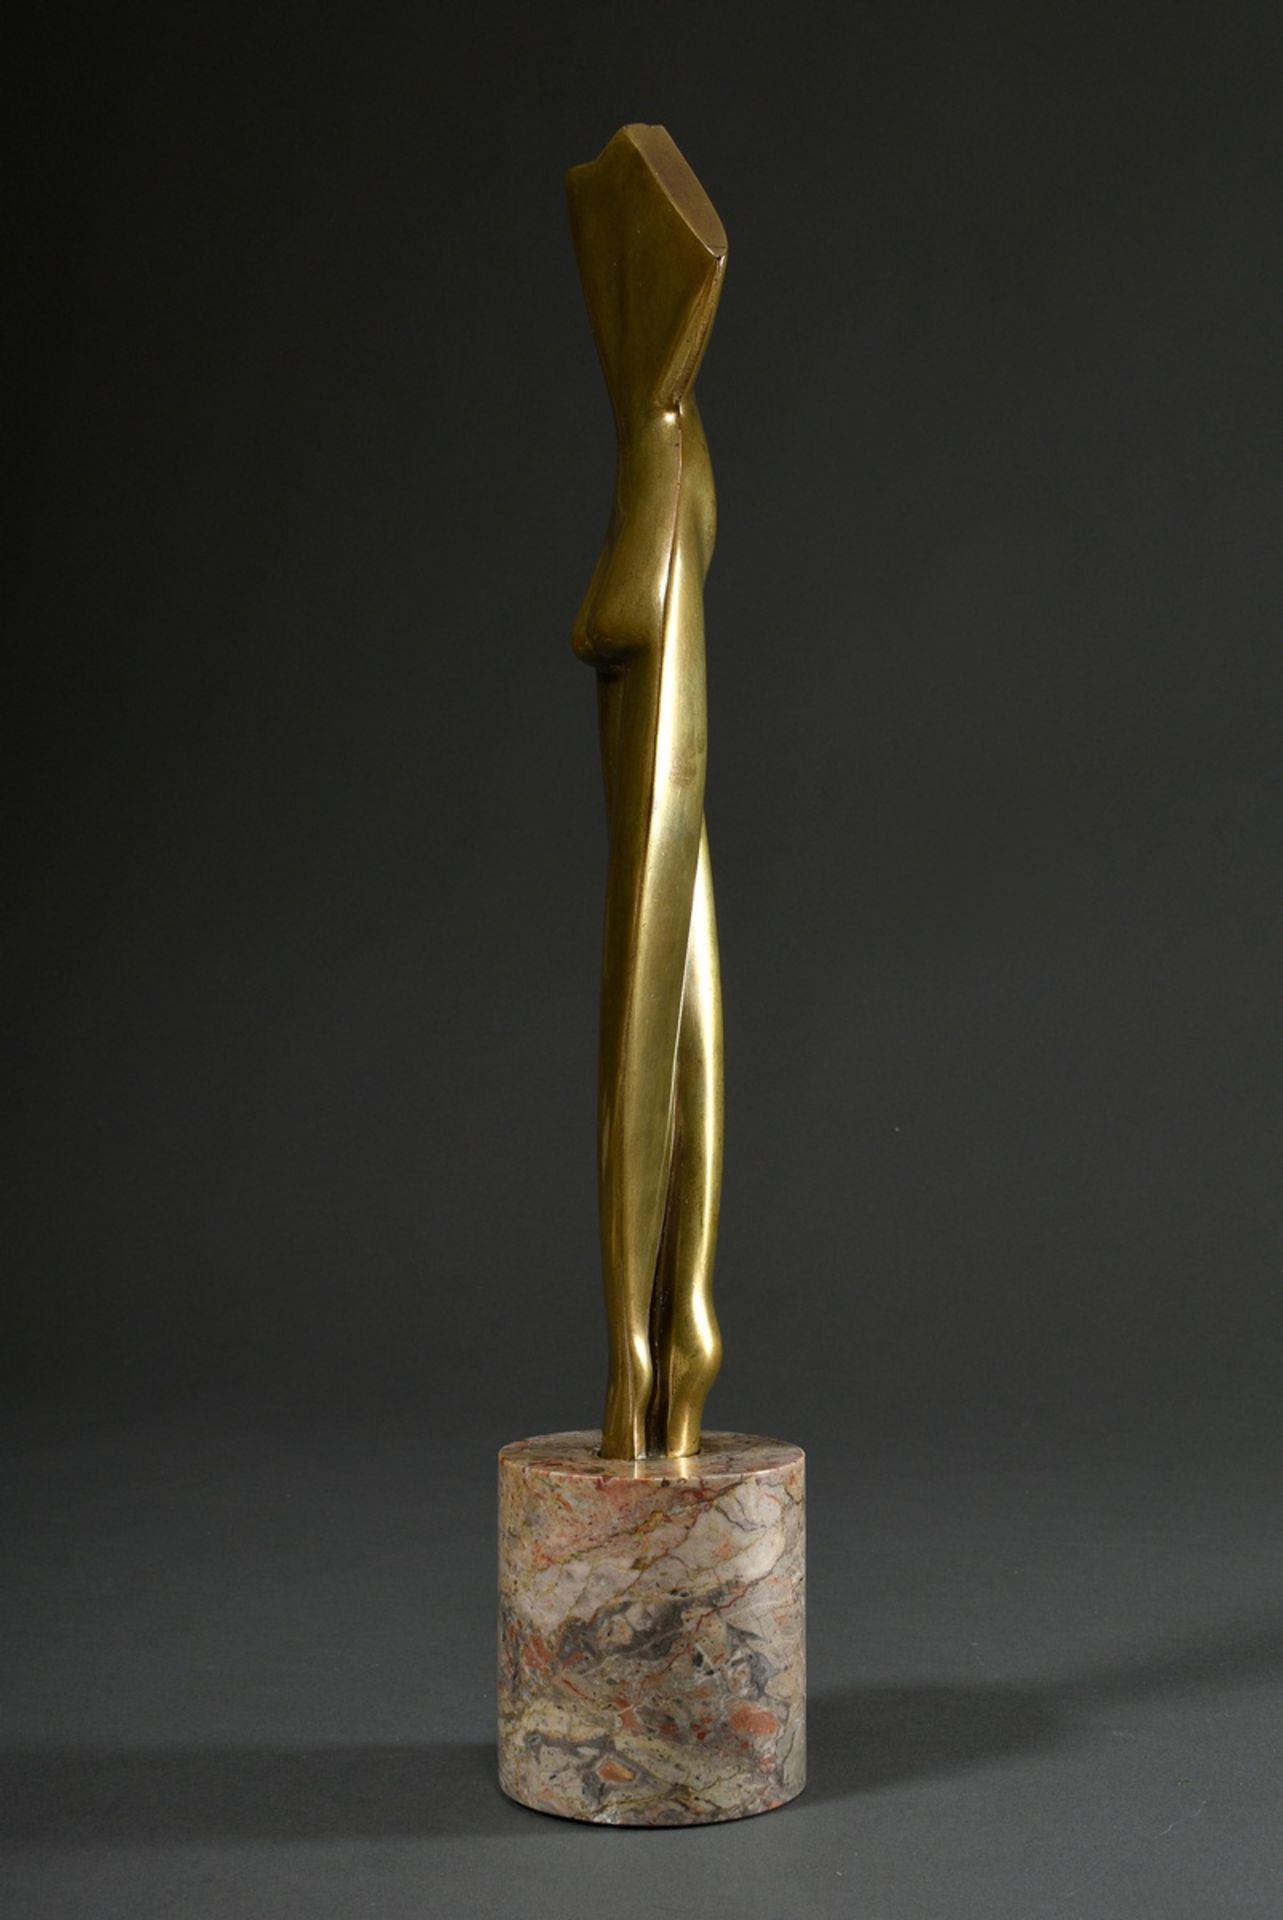 Archipenko, Alexander (1887-1964) "Flat Torso" 1914, early life cast around 1920, bronze with gold- - Image 3 of 17